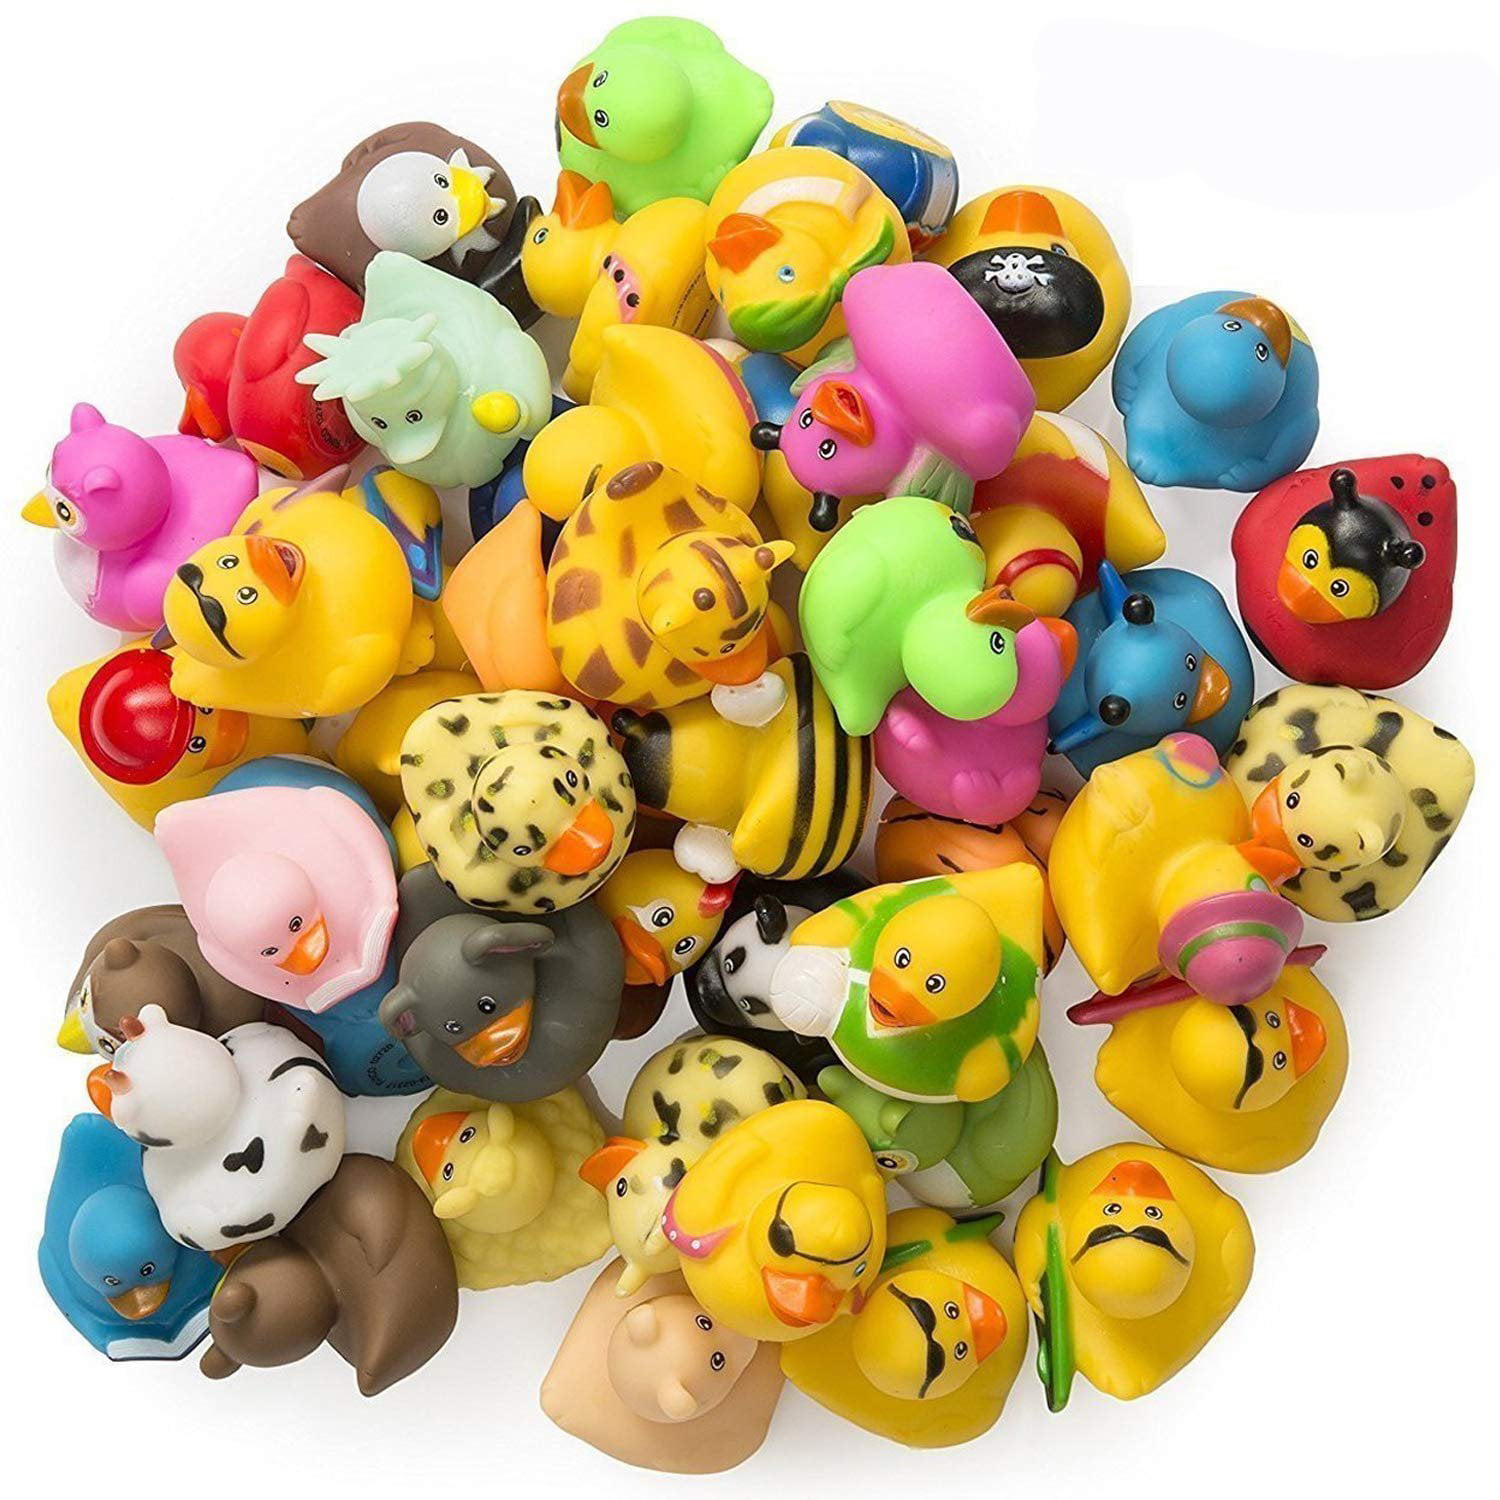 Baby Showers Accessories 100-Pack Fight Together 100 Pack Rubber Duck Bath Toy Assortment Birthdays Bath Time Bulk Floater Duck for Kids and More Party Favors